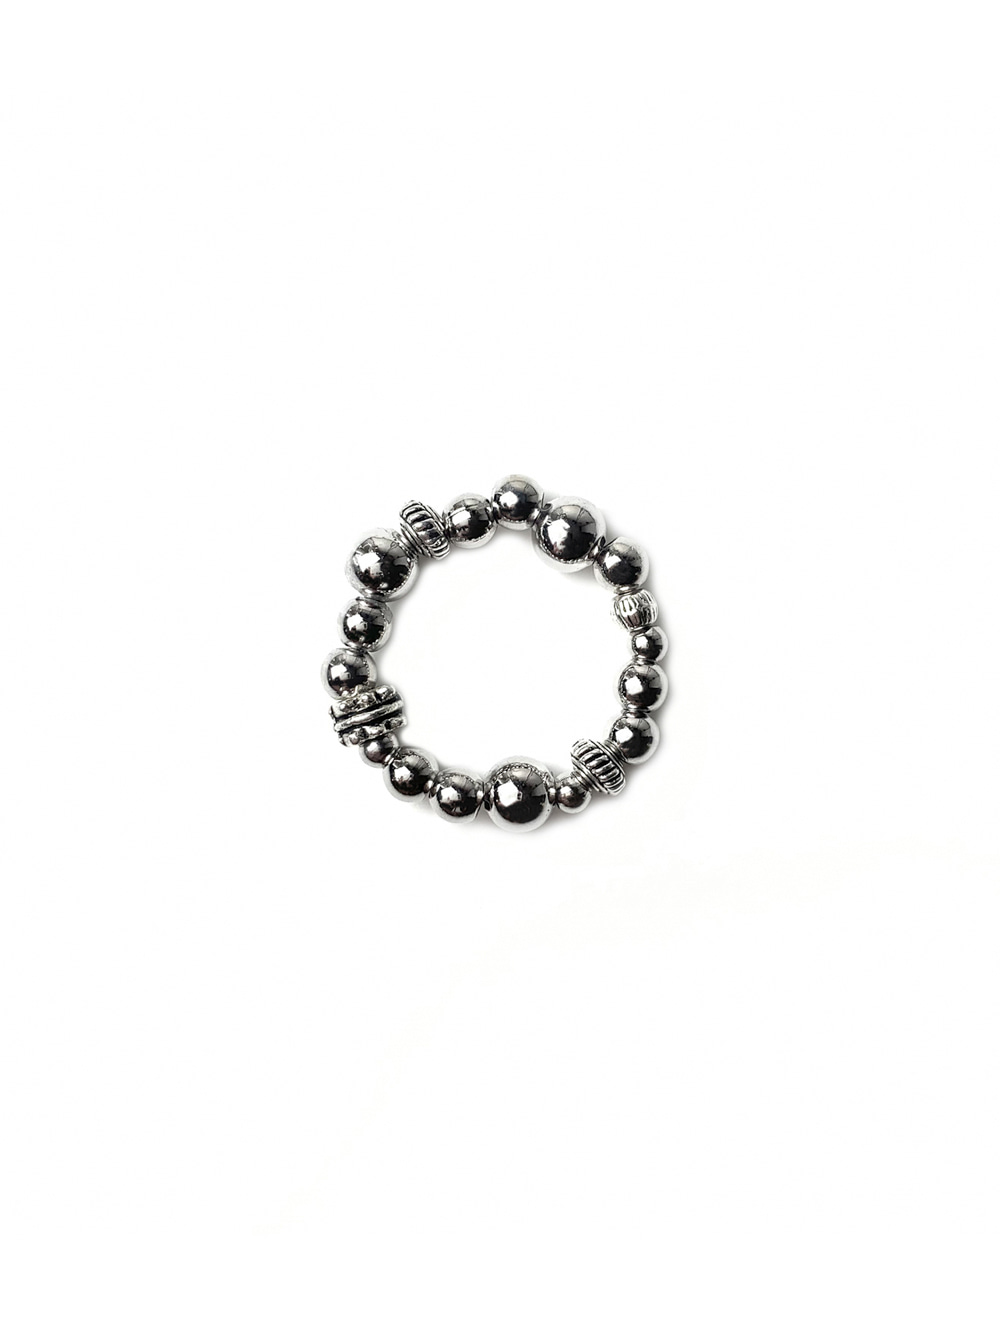 Surgical Ball Chain Ring